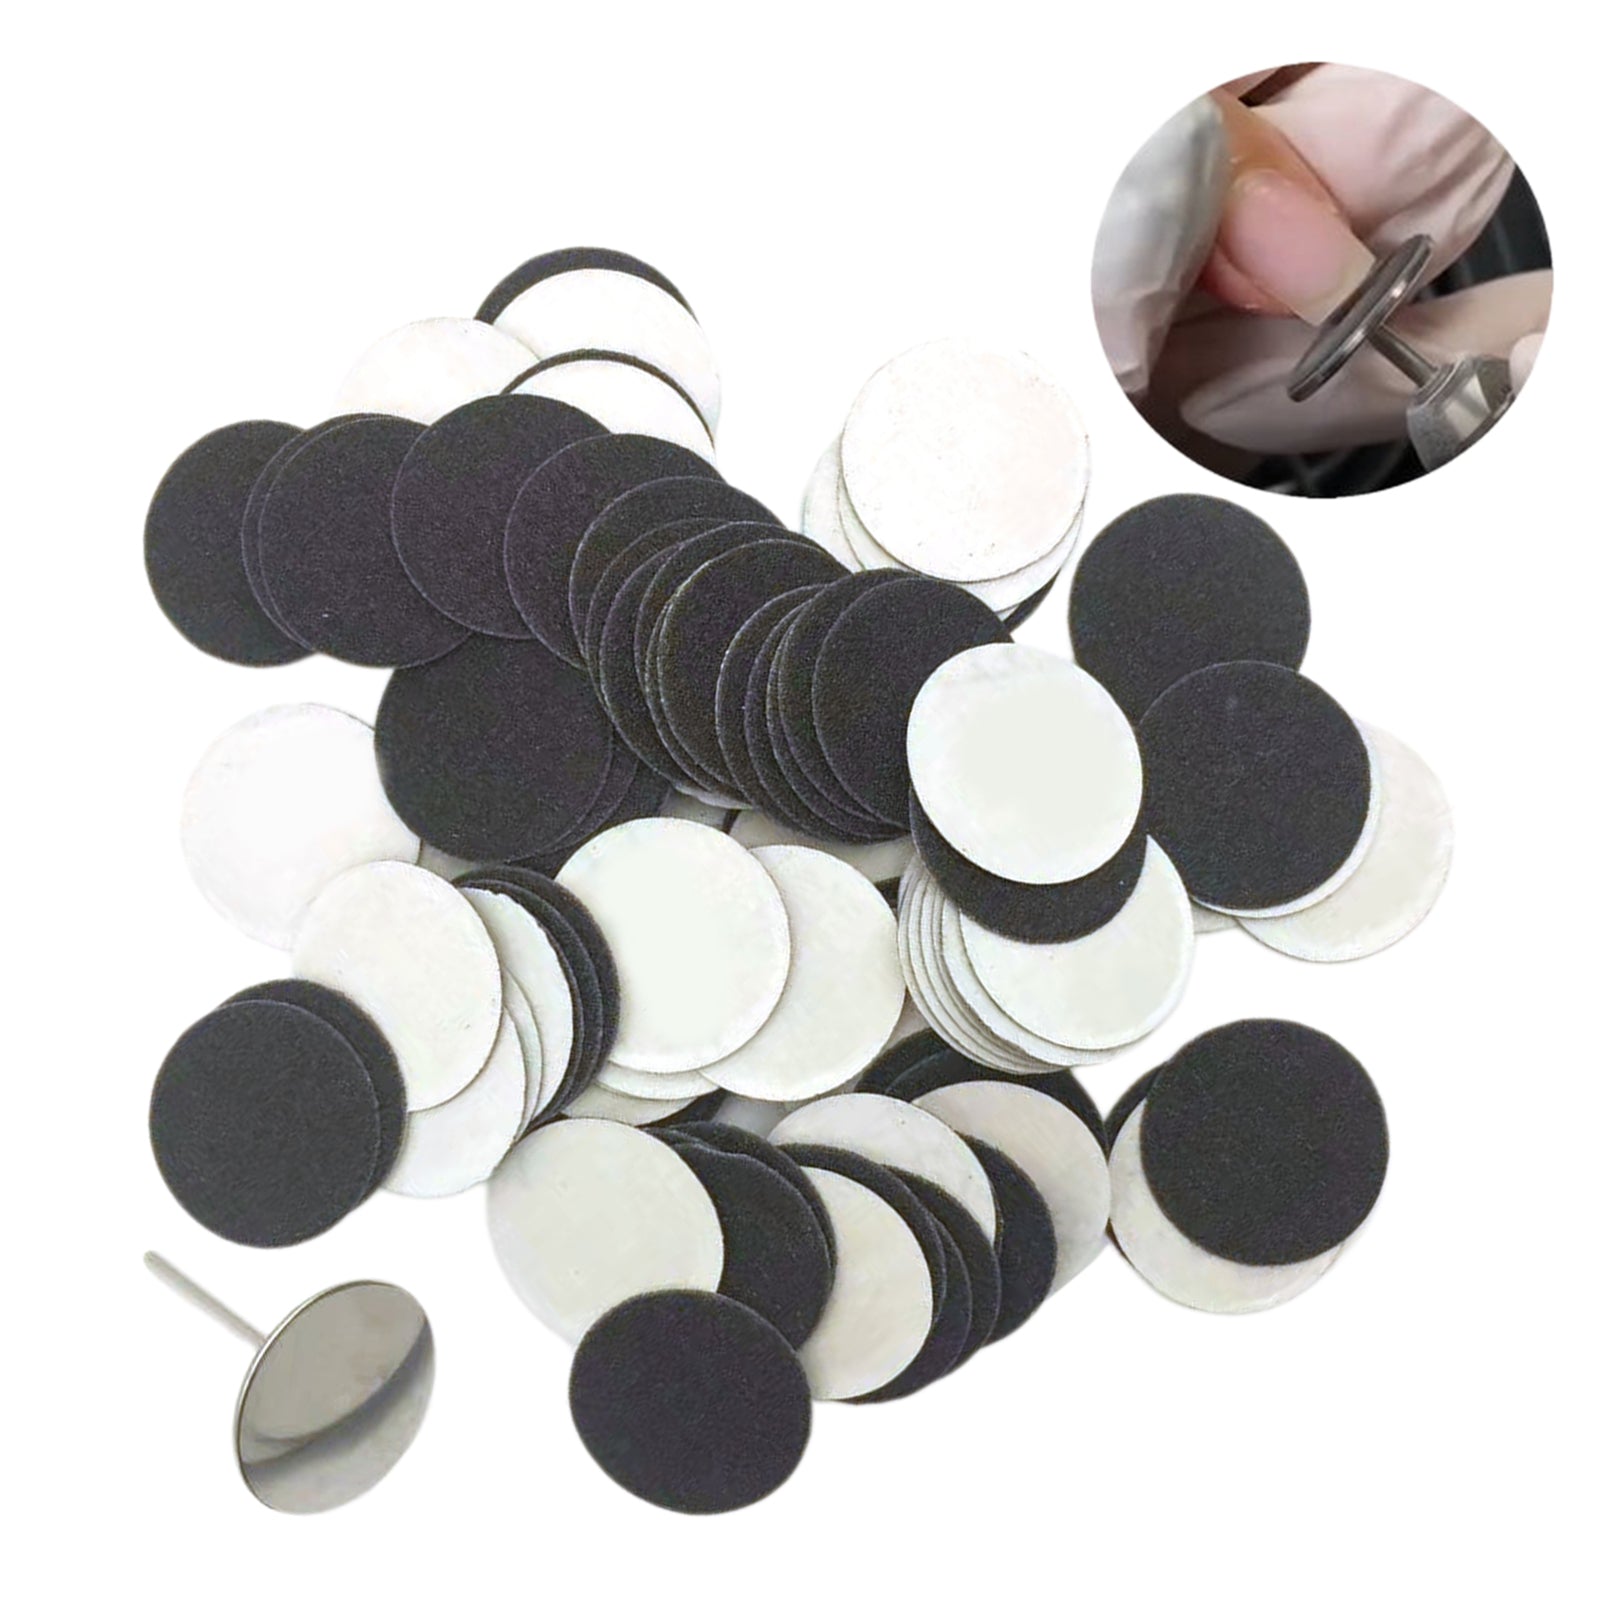 Sand Paper Replacement Pads For Electric Foot File  25mm 150Grit  100Pcs